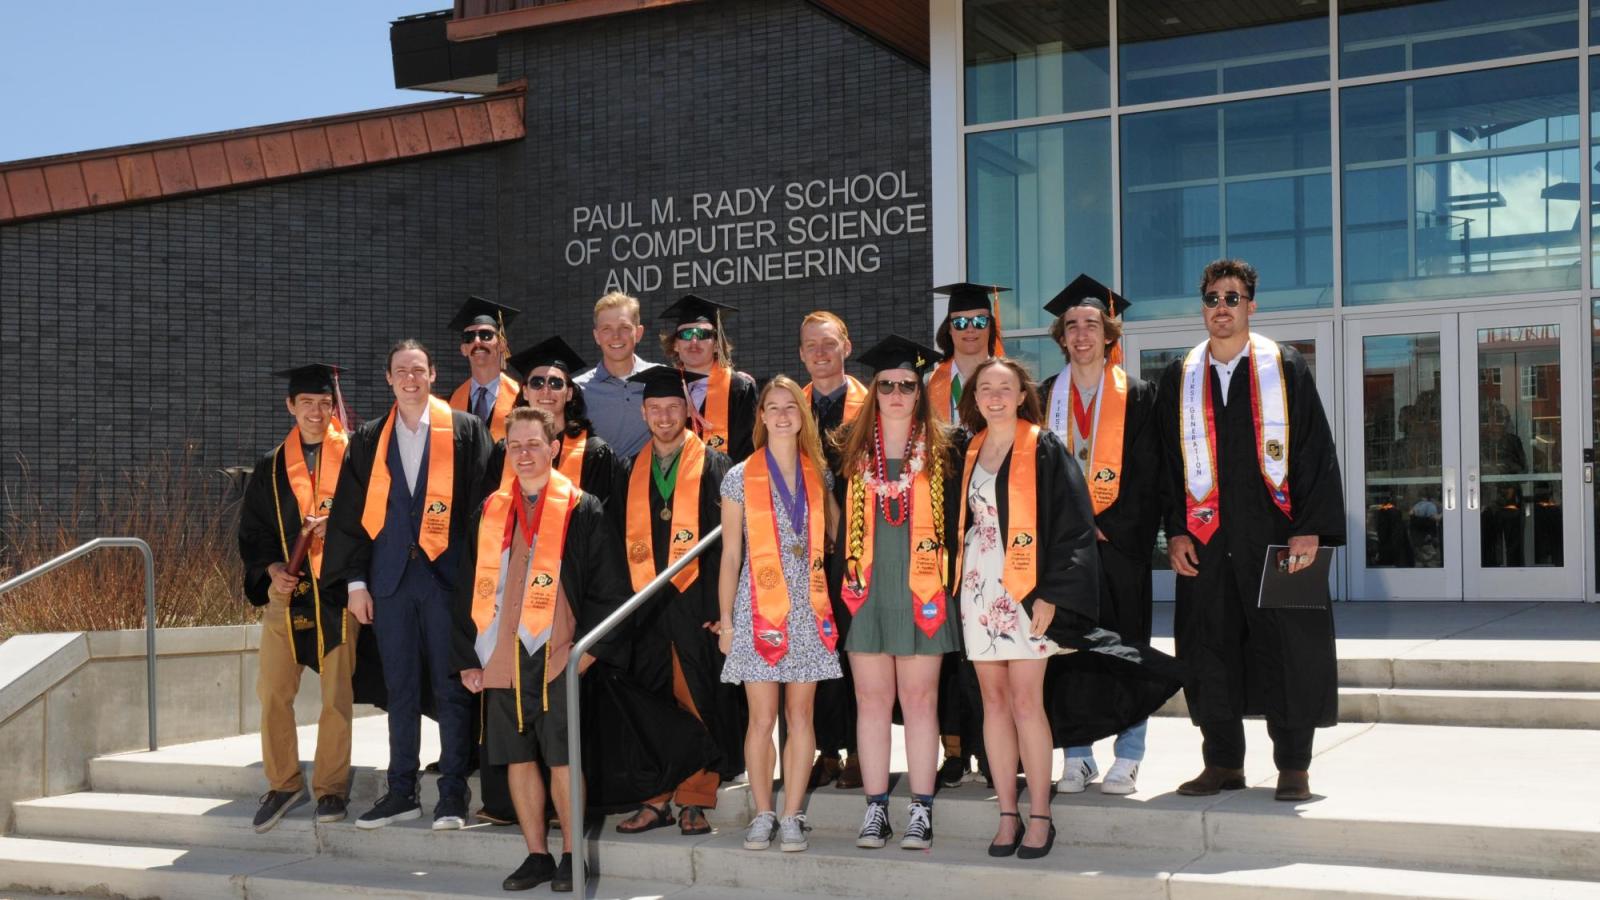 The graduates pose for a group photo outside the engineering building in Gunnison